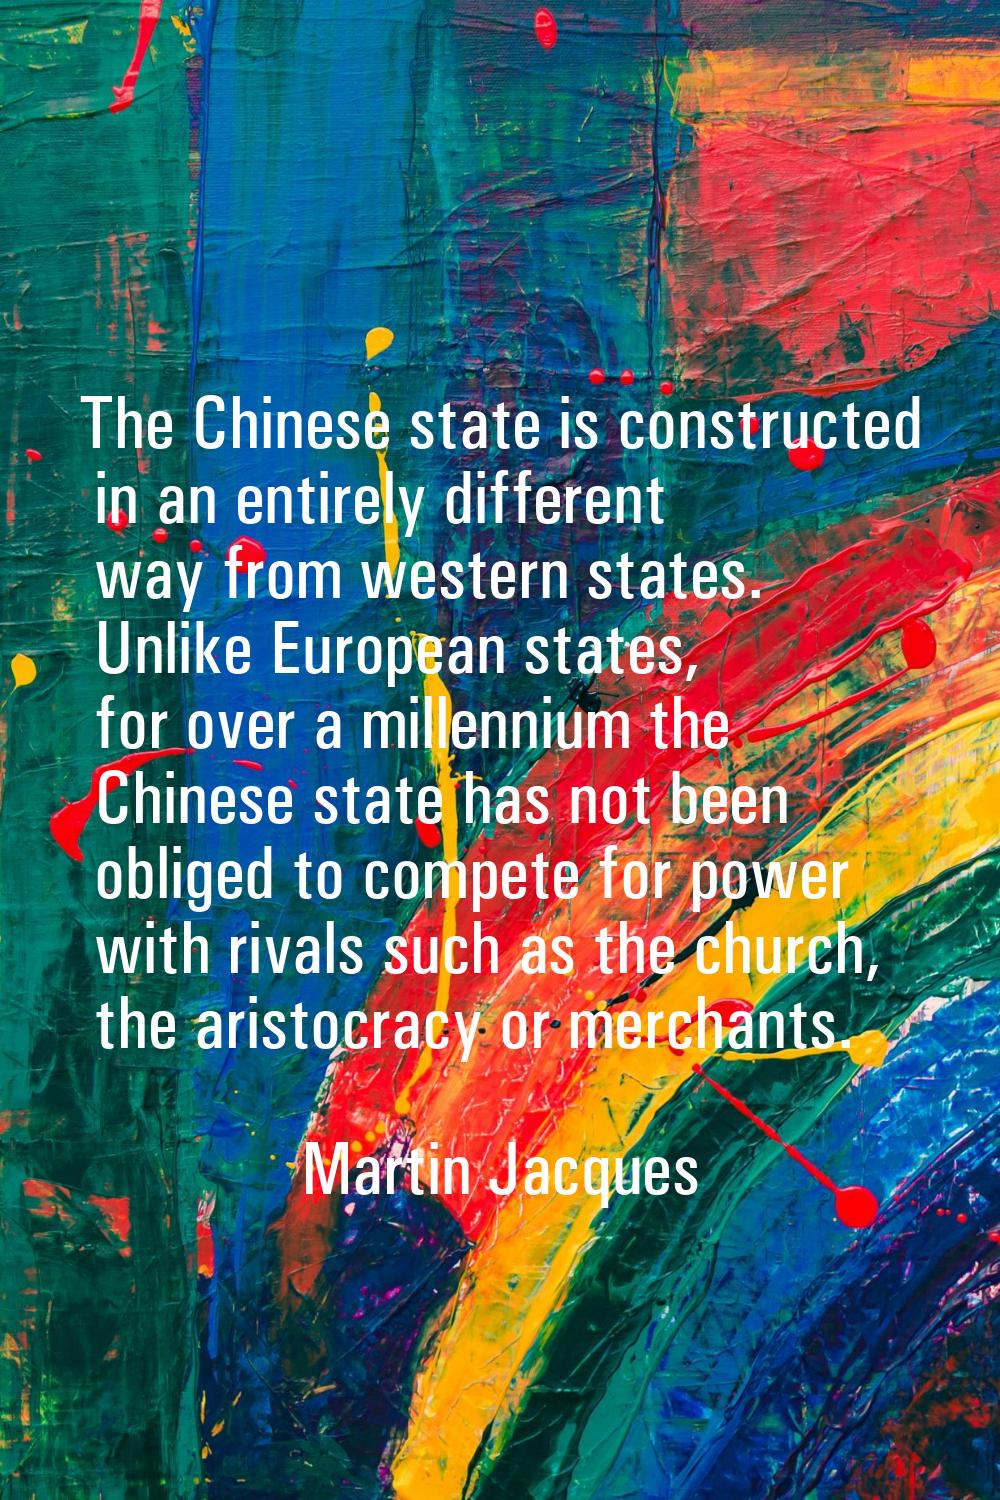 The Chinese state is constructed in an entirely different way from western states. Unlike European 